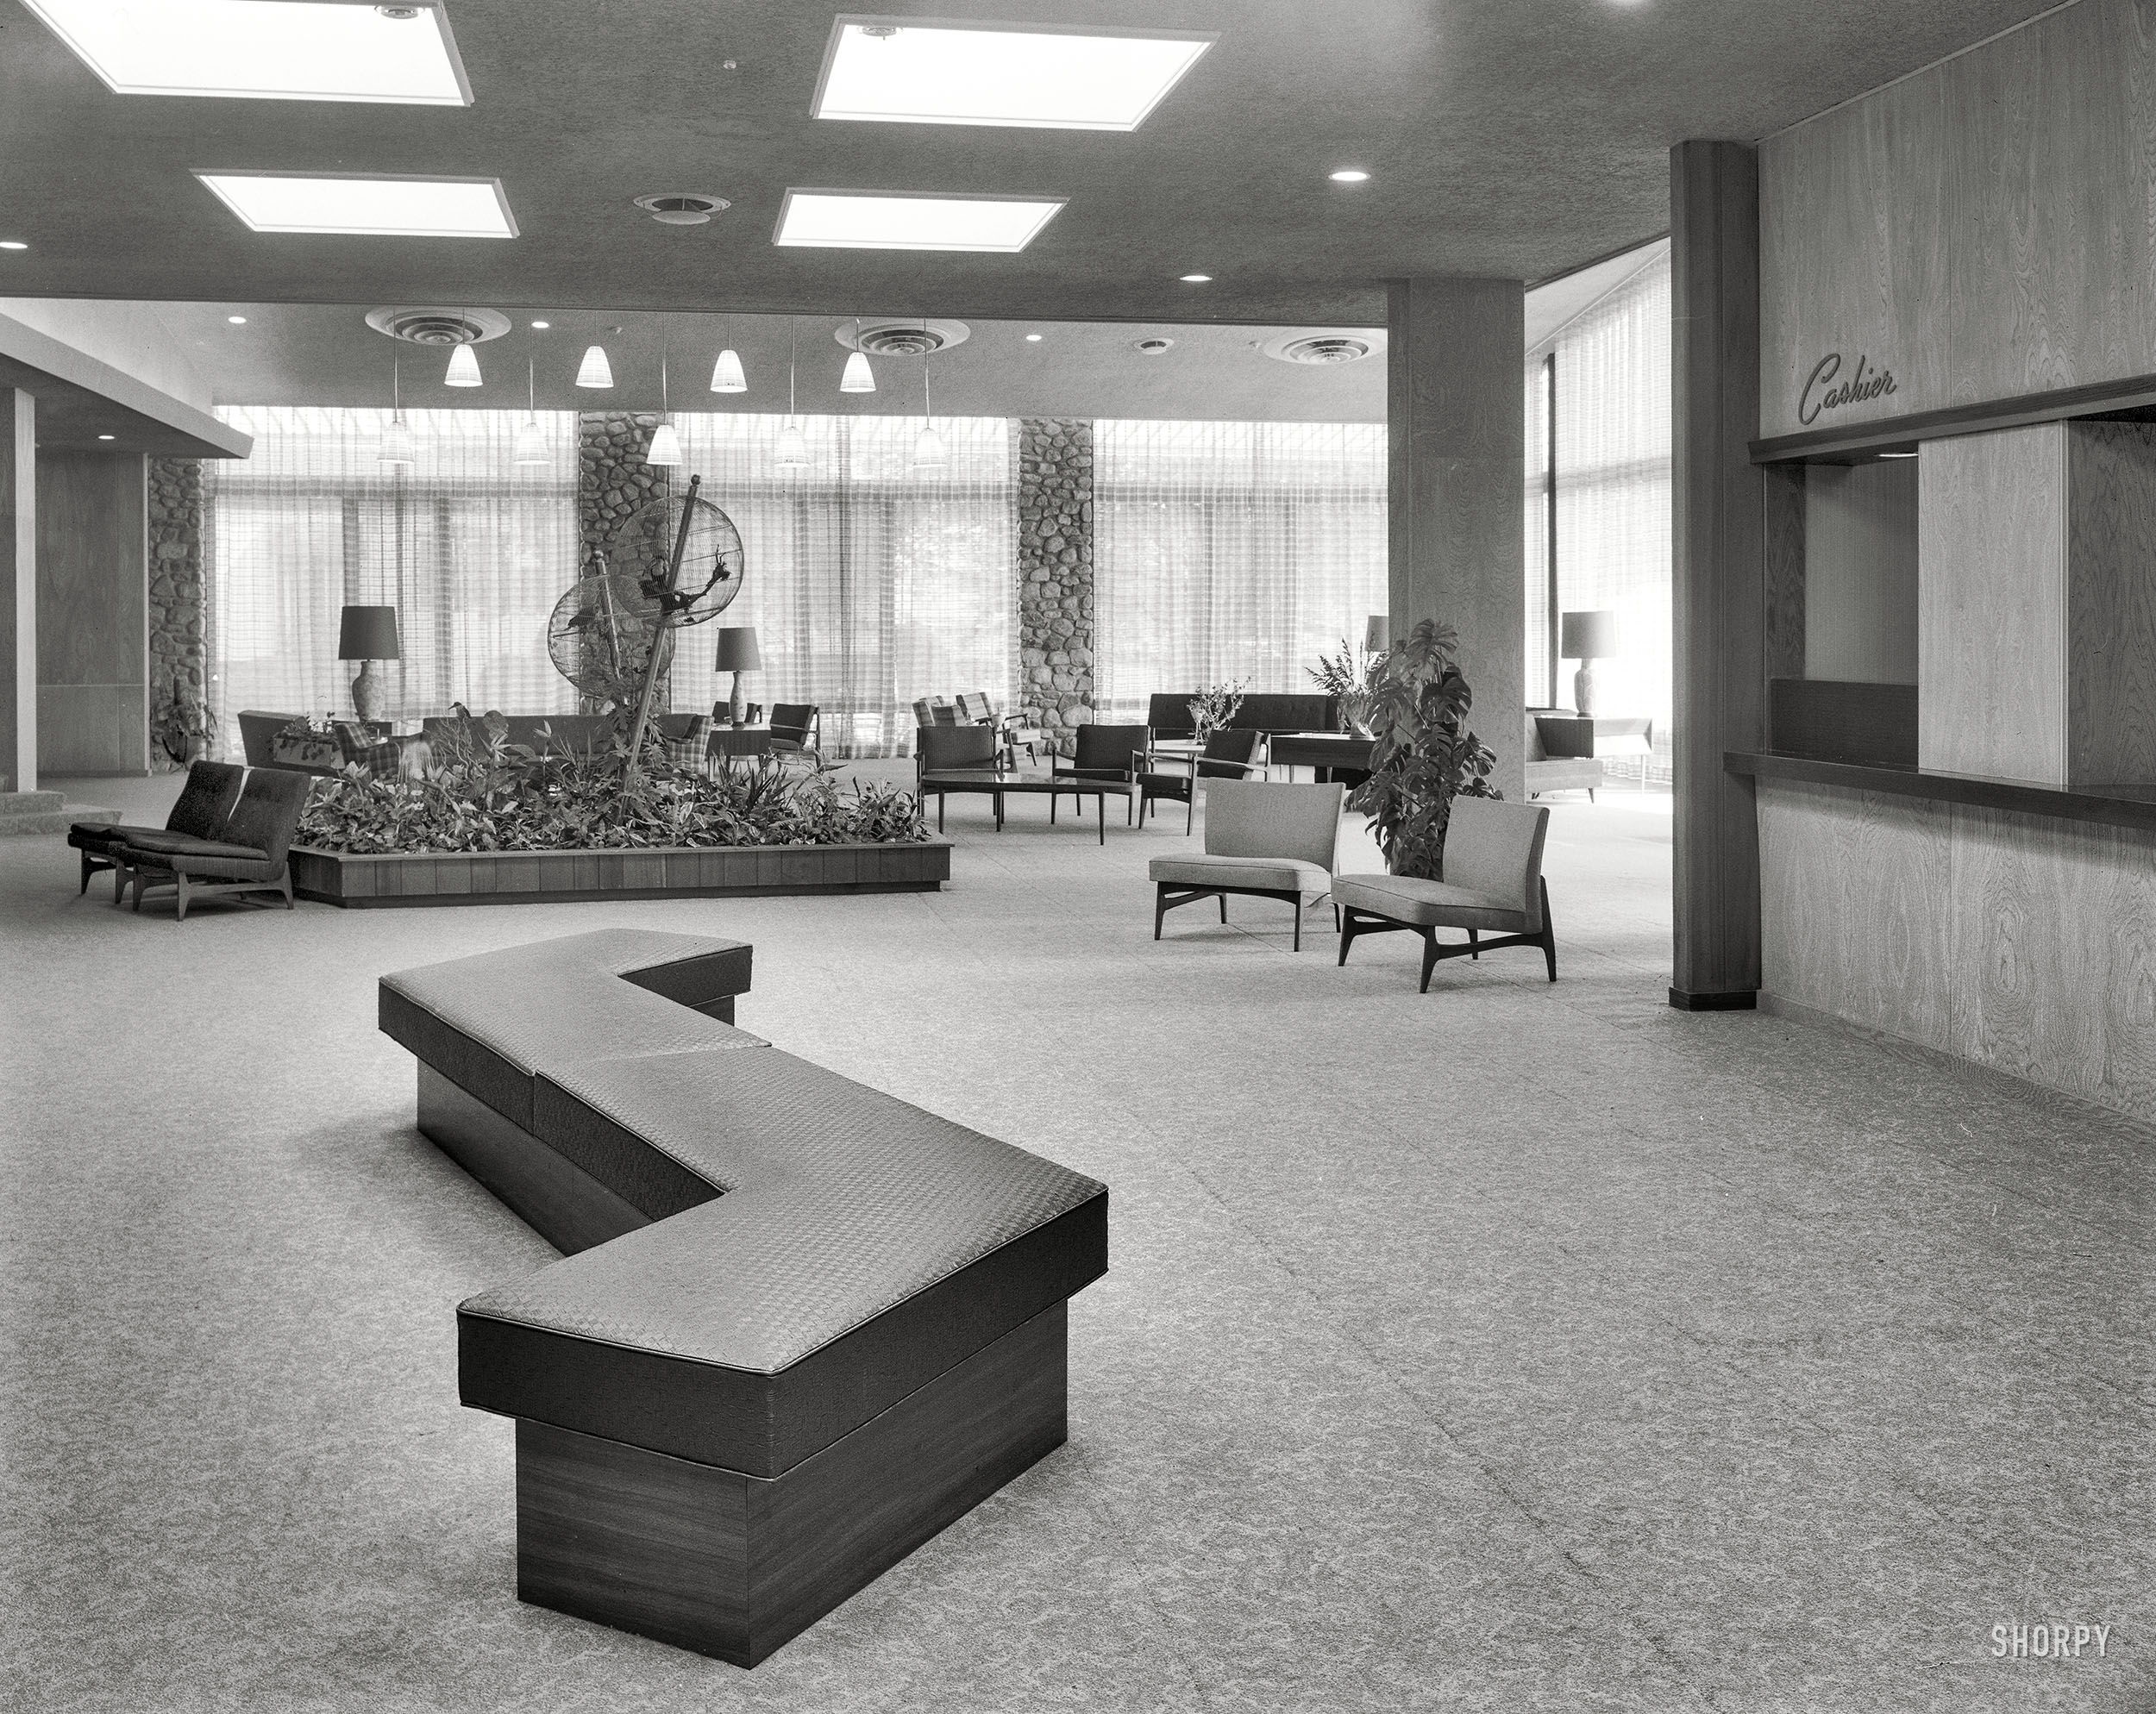 Shorpy Historical Picture Archive :: Lobby S: 1957 high-resolution photo